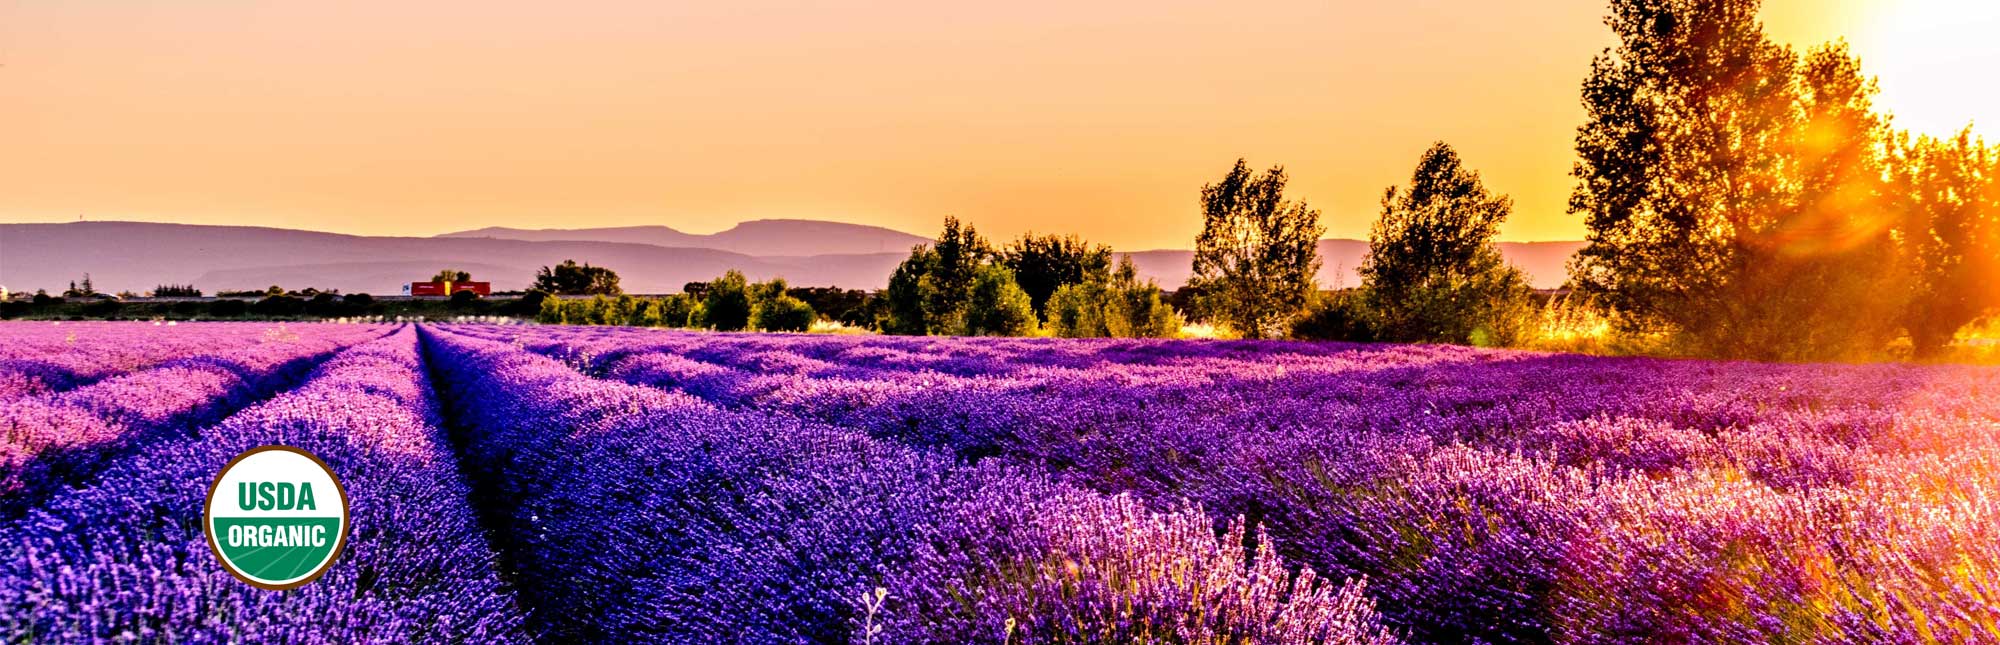 sunset over a lavender field with usda organic logo in left corner